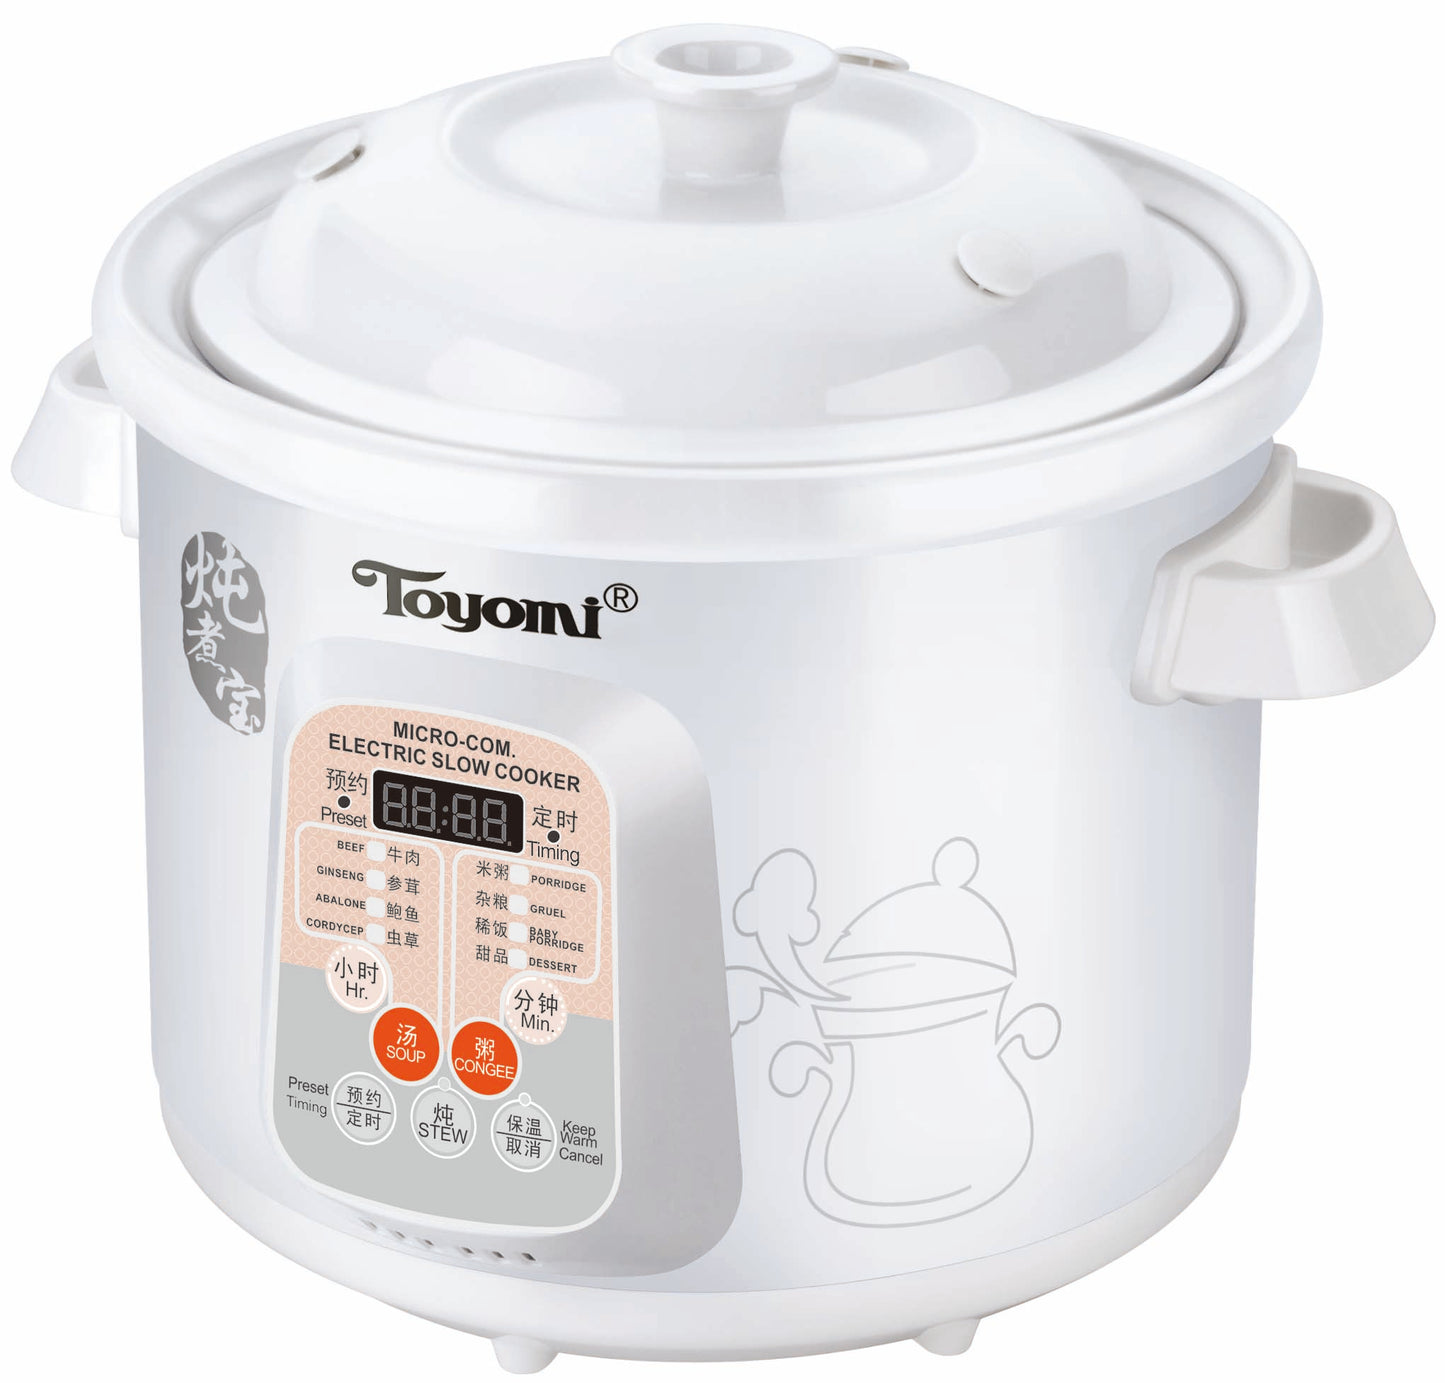 Load image into Gallery viewer, TOYOMI 2.0L Electric Micro-com Slow Cooker SC 2050 - TOYOMI
